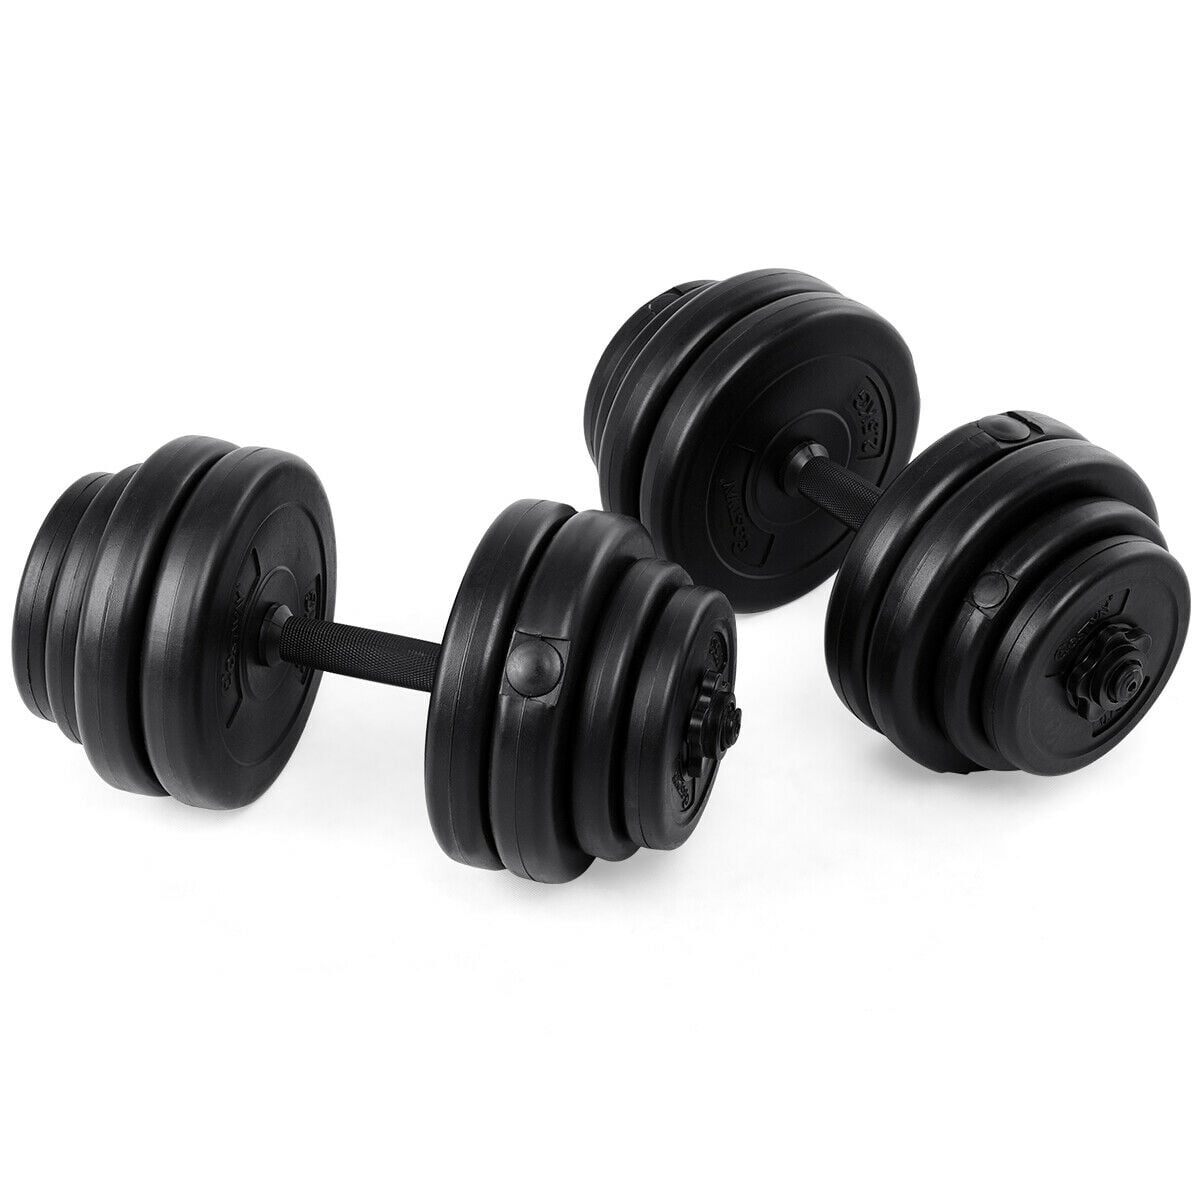 2 x 52.5 lb Yes4All 105 lb Adjustable Dumbbell Weight Set Like Bowflex 